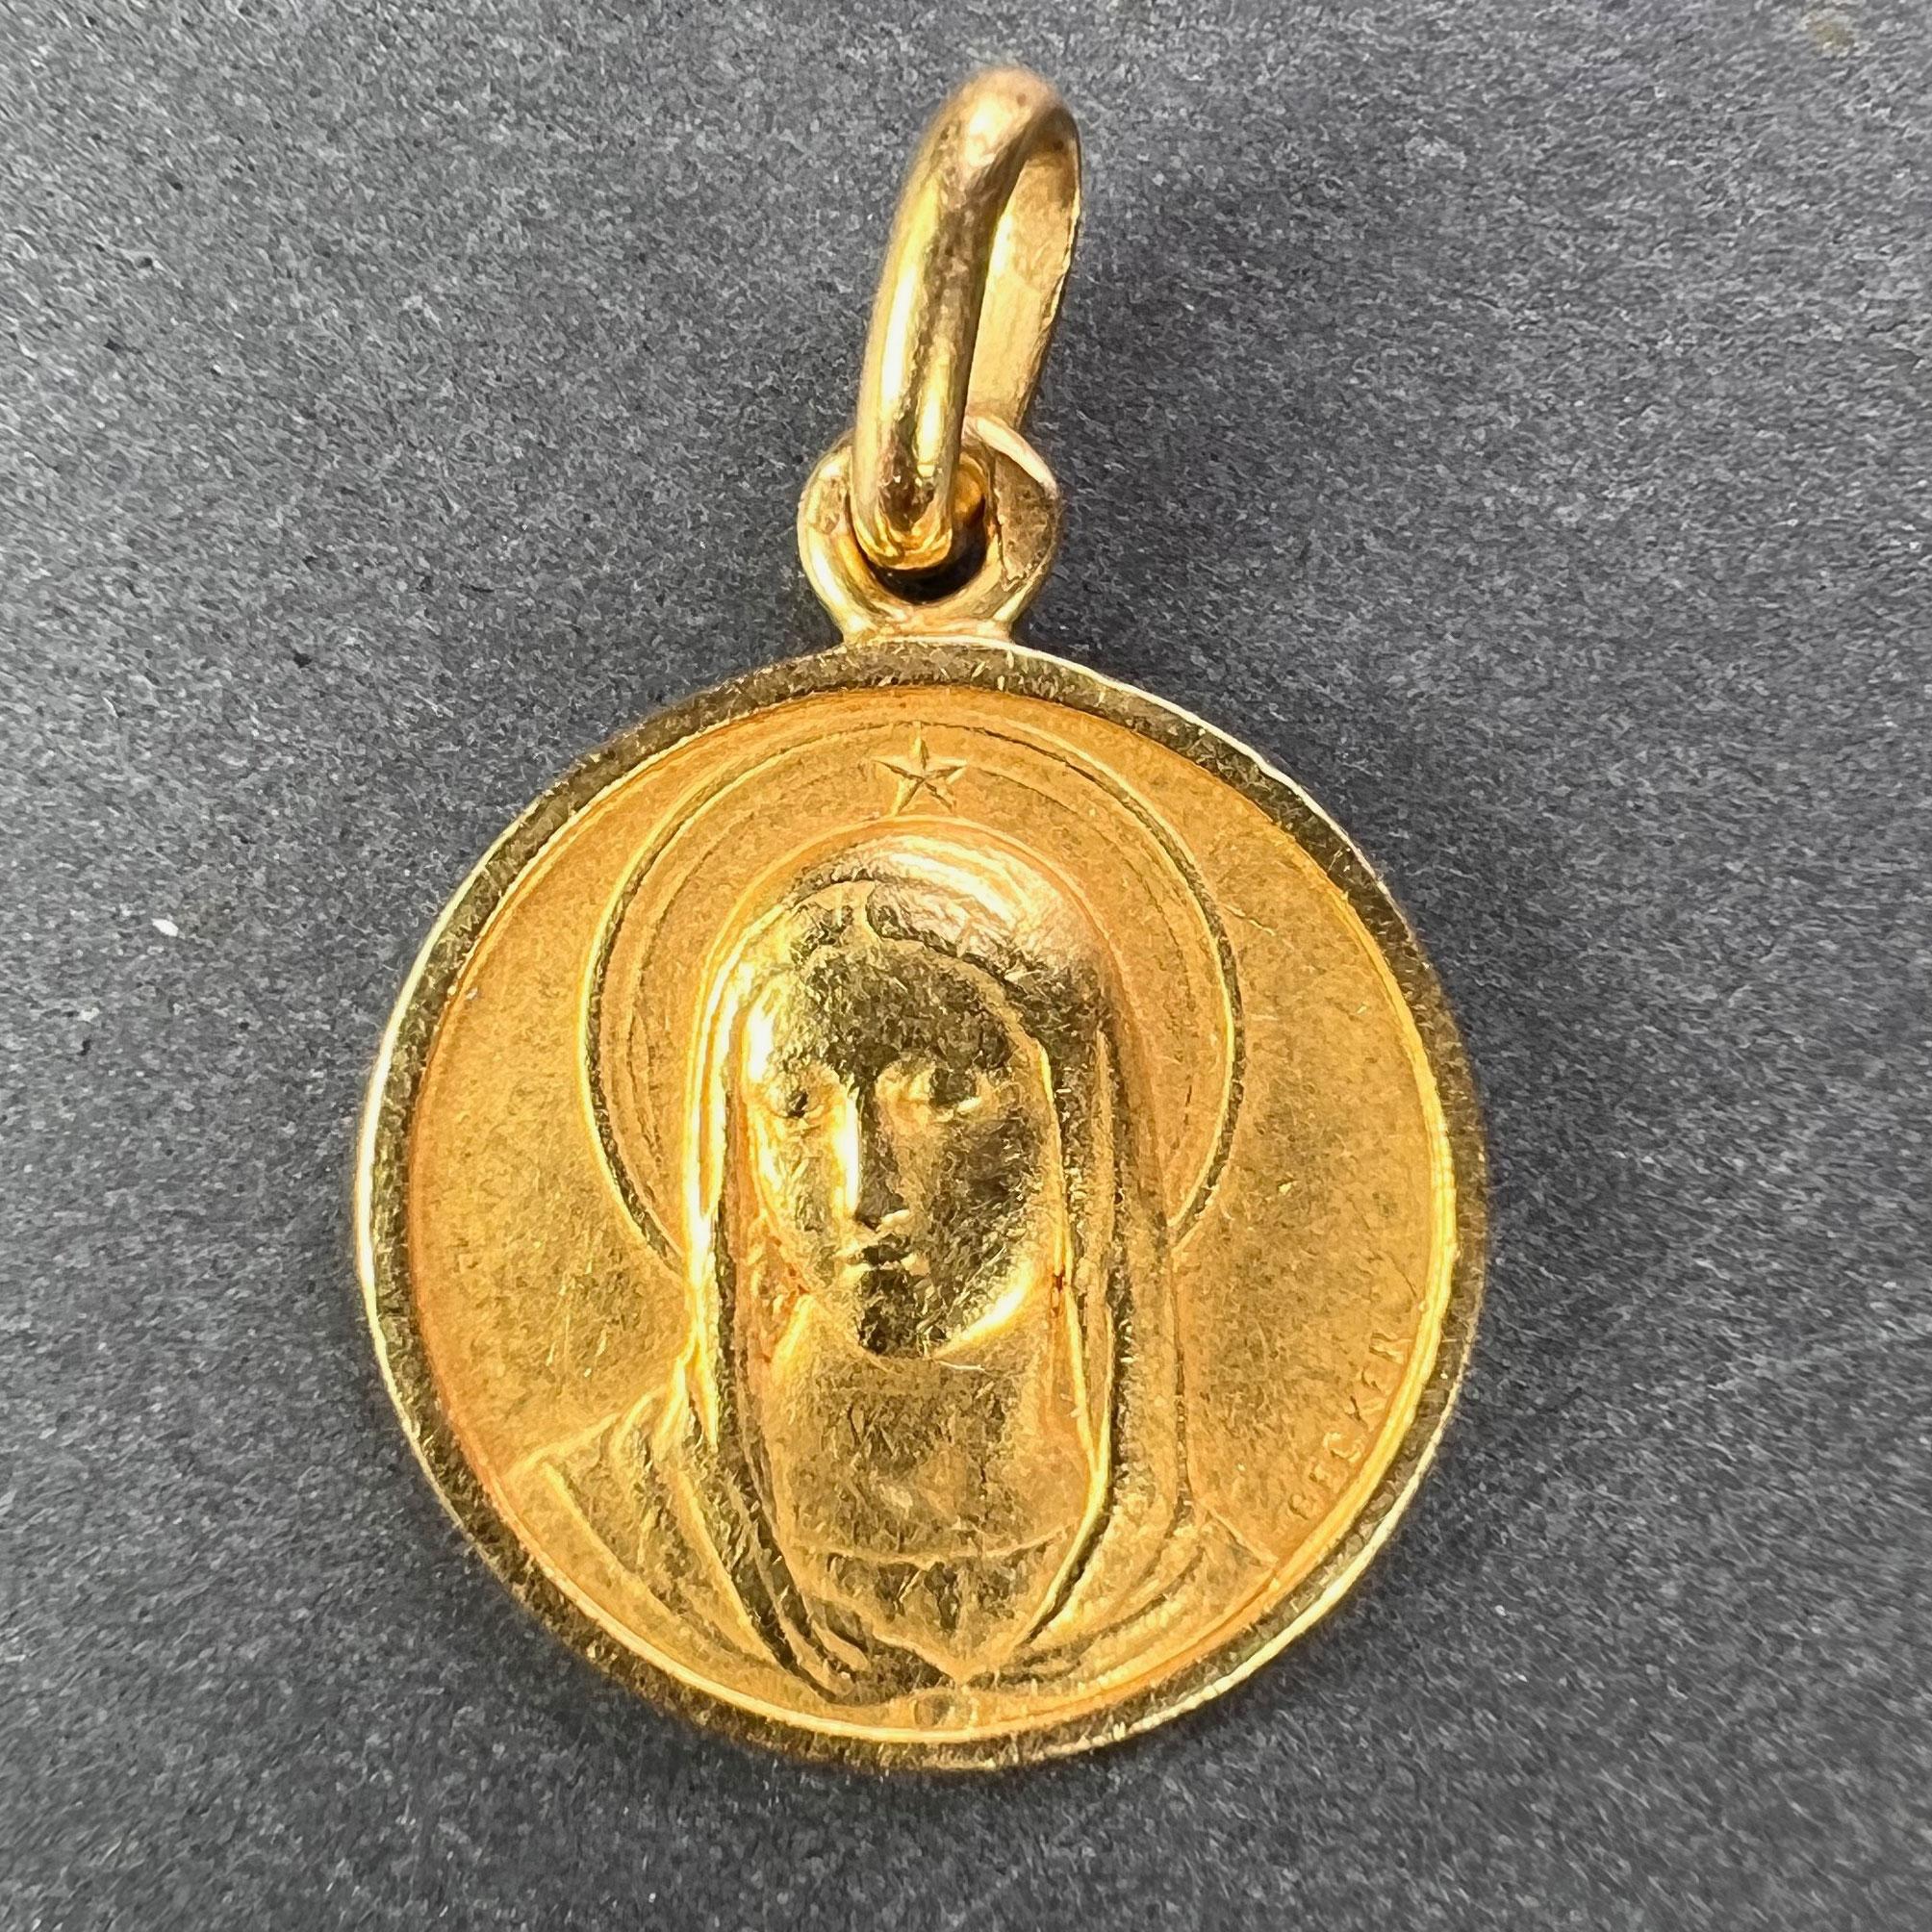 An 18 karat (18K) yellow gold charm pendant depicting the Virgin Mary. Engraved to the reverse with the date 23 Juin 1957. Signed Becker and stamped with the eagle mark for 18 karat gold and French manufacture with an unknown makers